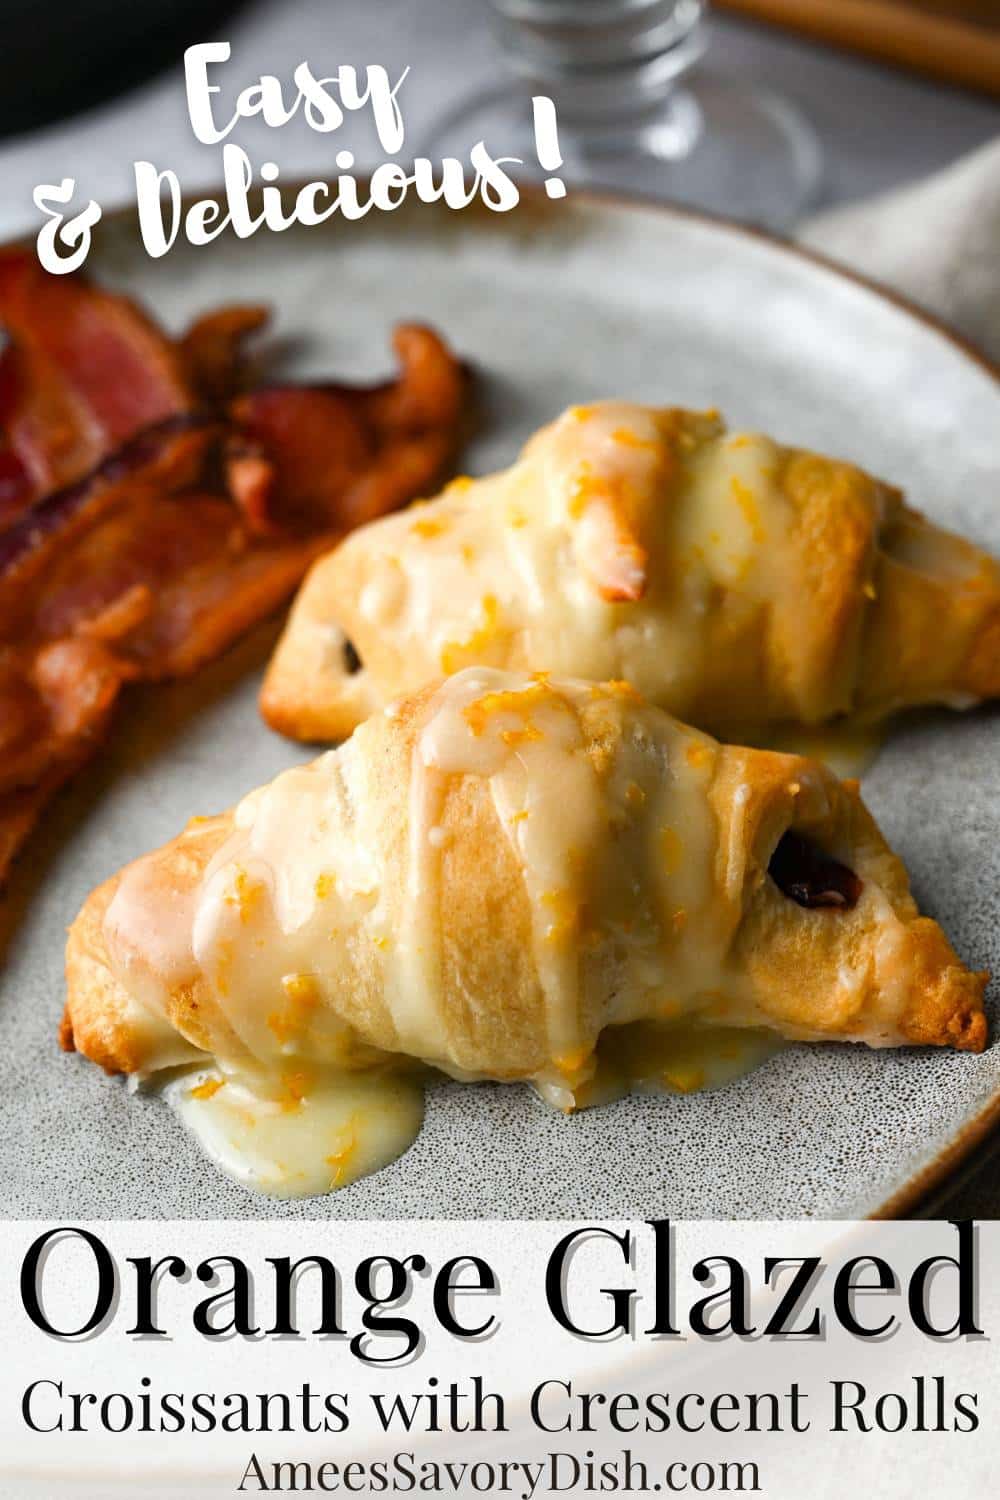 Easy homemade glazed croissants stuffed with delicious filling options and topped with a heavenly orange glaze. Perfect for the holidays! via @Ameessavorydish